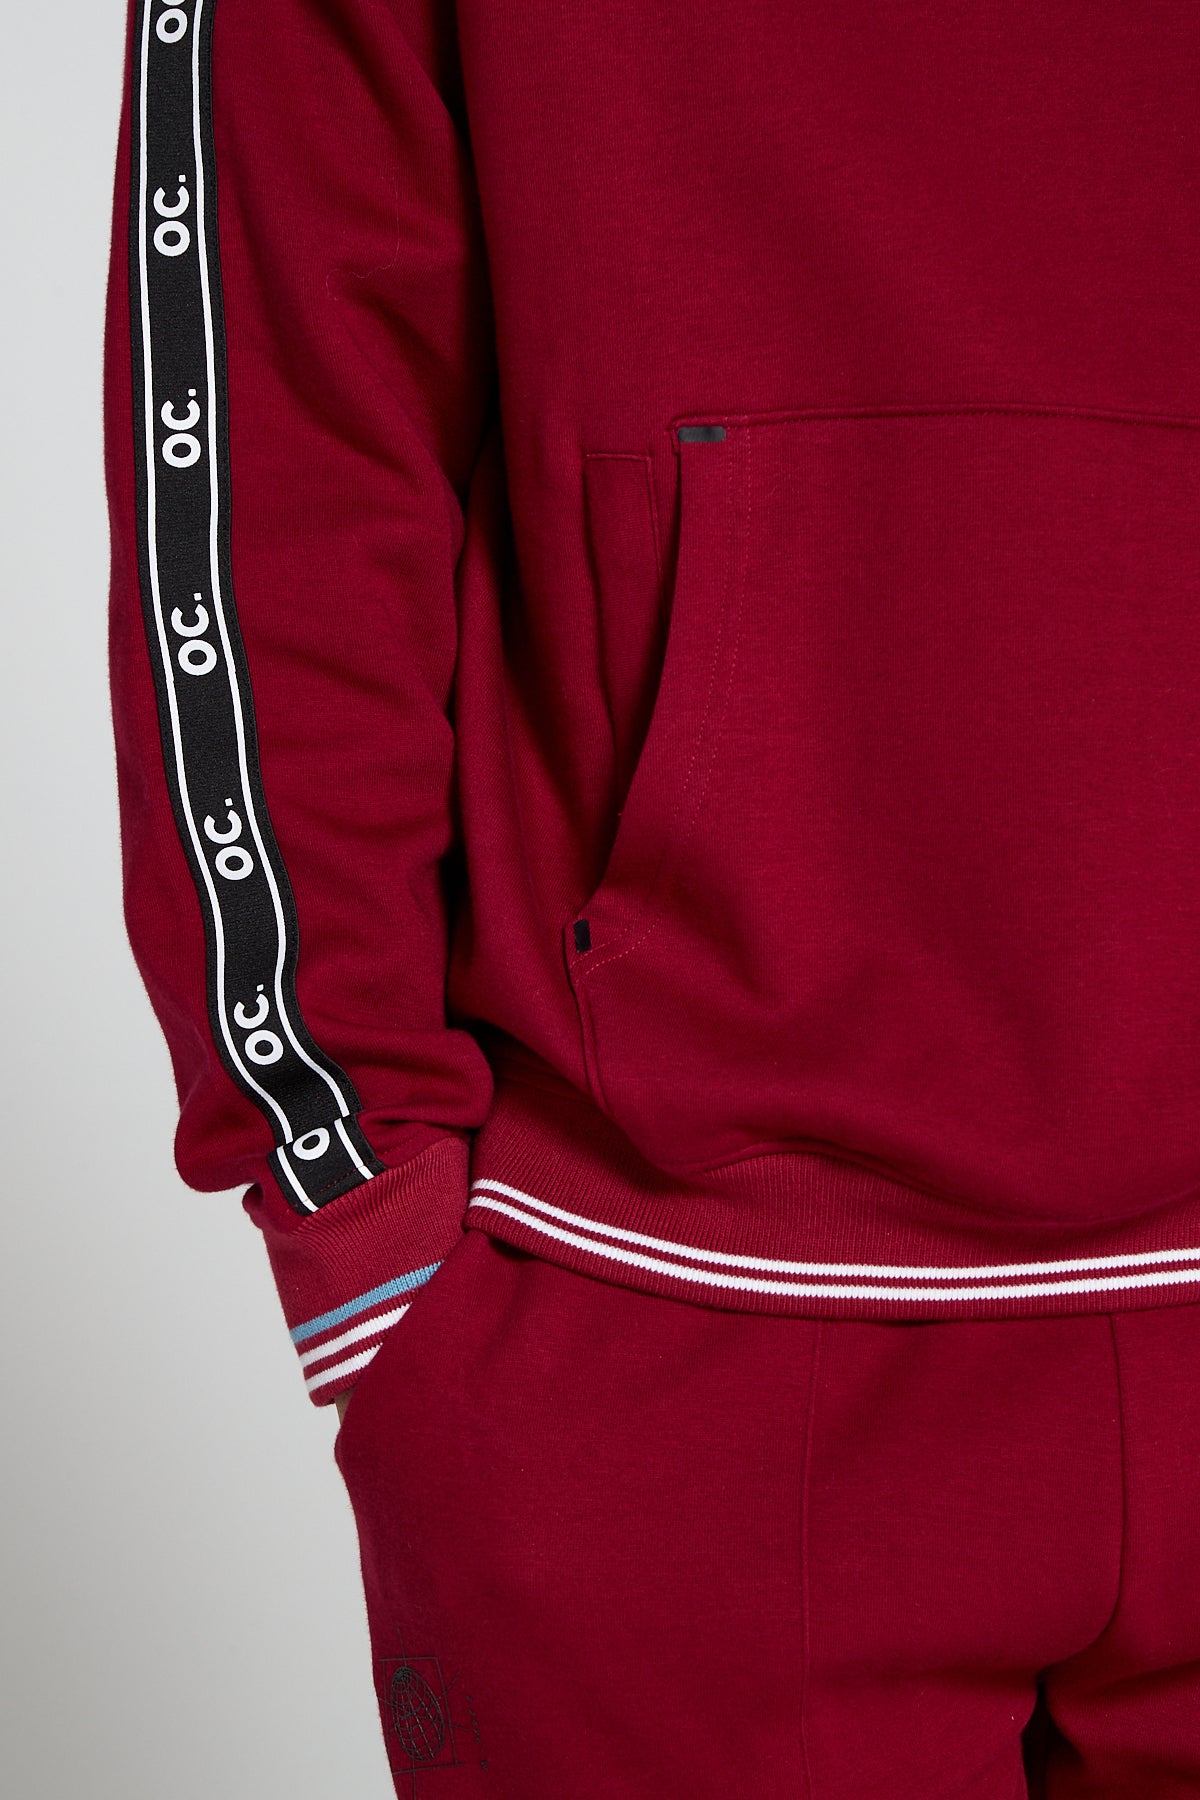 Track 2.0 Classic Hoodie - Cranberry Red